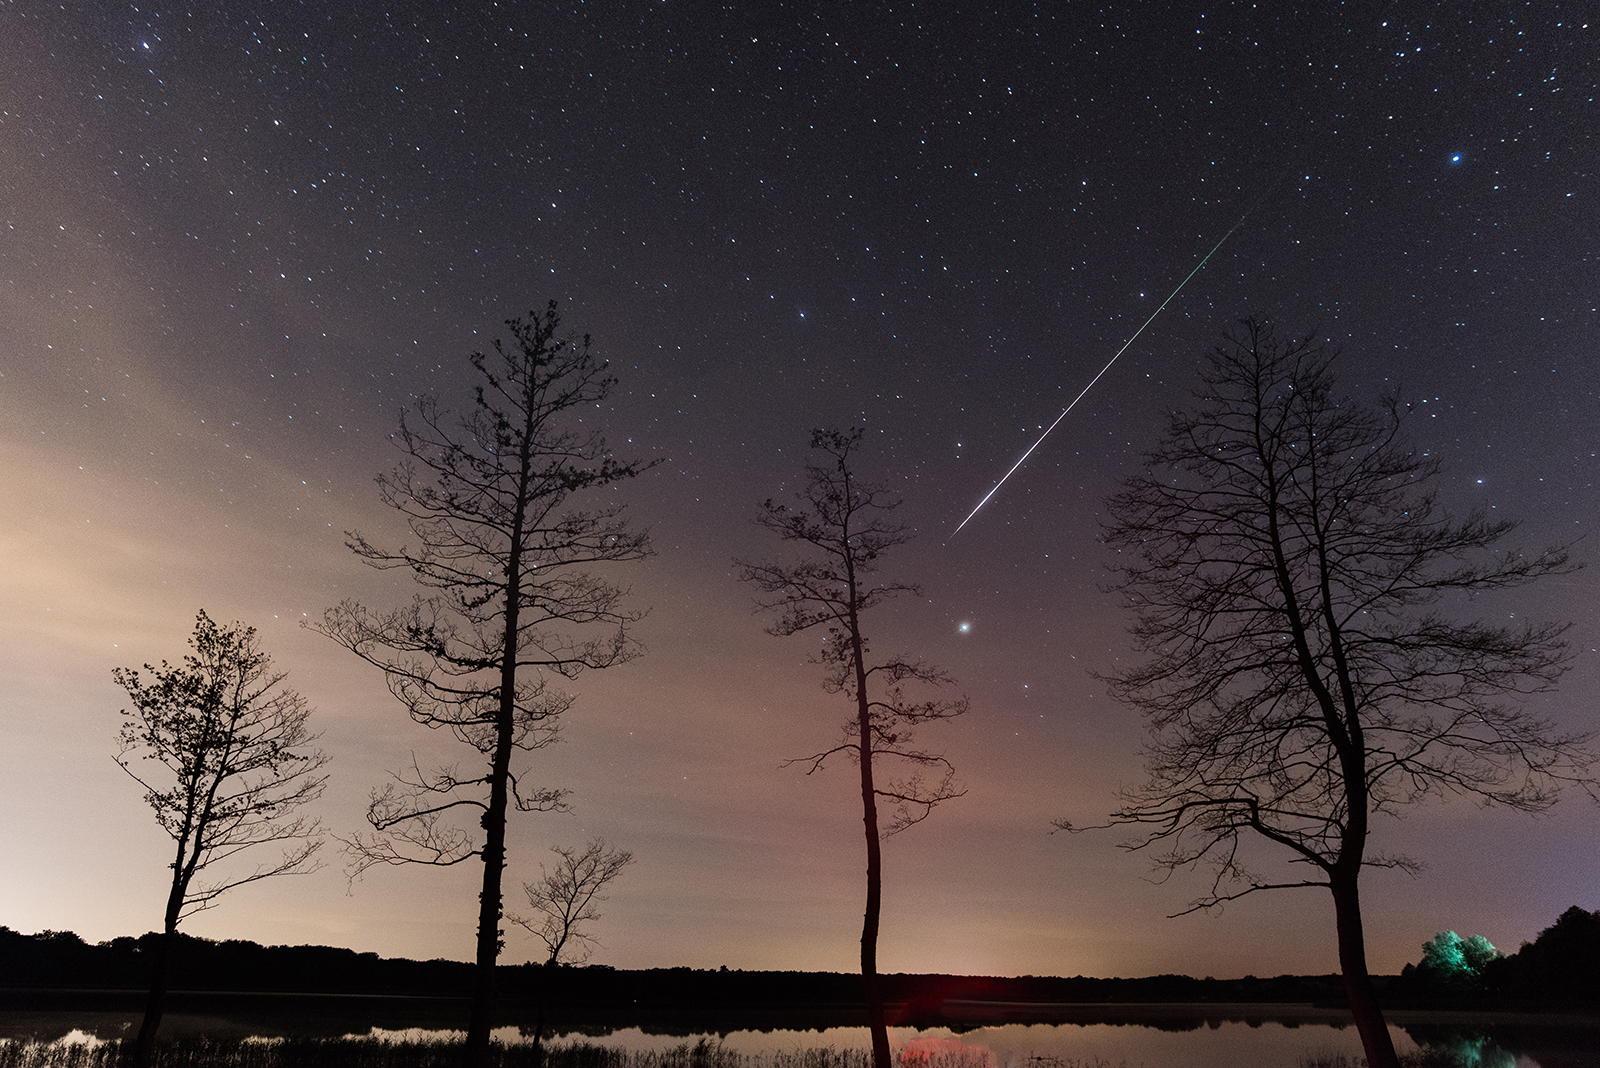 How to watch the spectacular Leonid meteor shower on
Thursday night